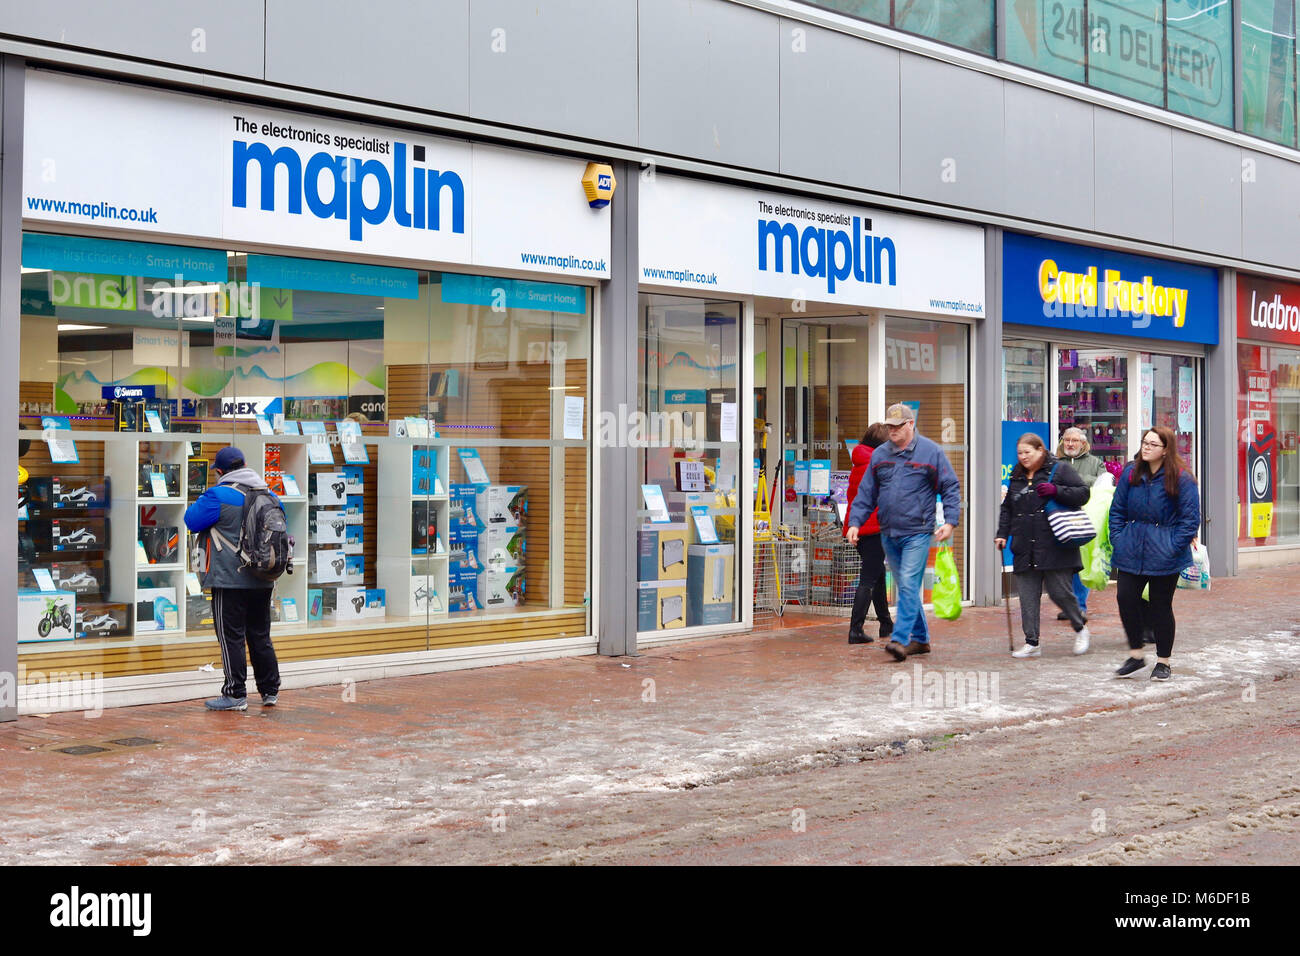 Ipswich, Suffolk. 3rd March 2018. UK News: Maplin electronic goods store still trading despite reported financial difficulties. Ipswich, Suffolk. Credit: Angela Chalmers/Alamy Live News Stock Photo